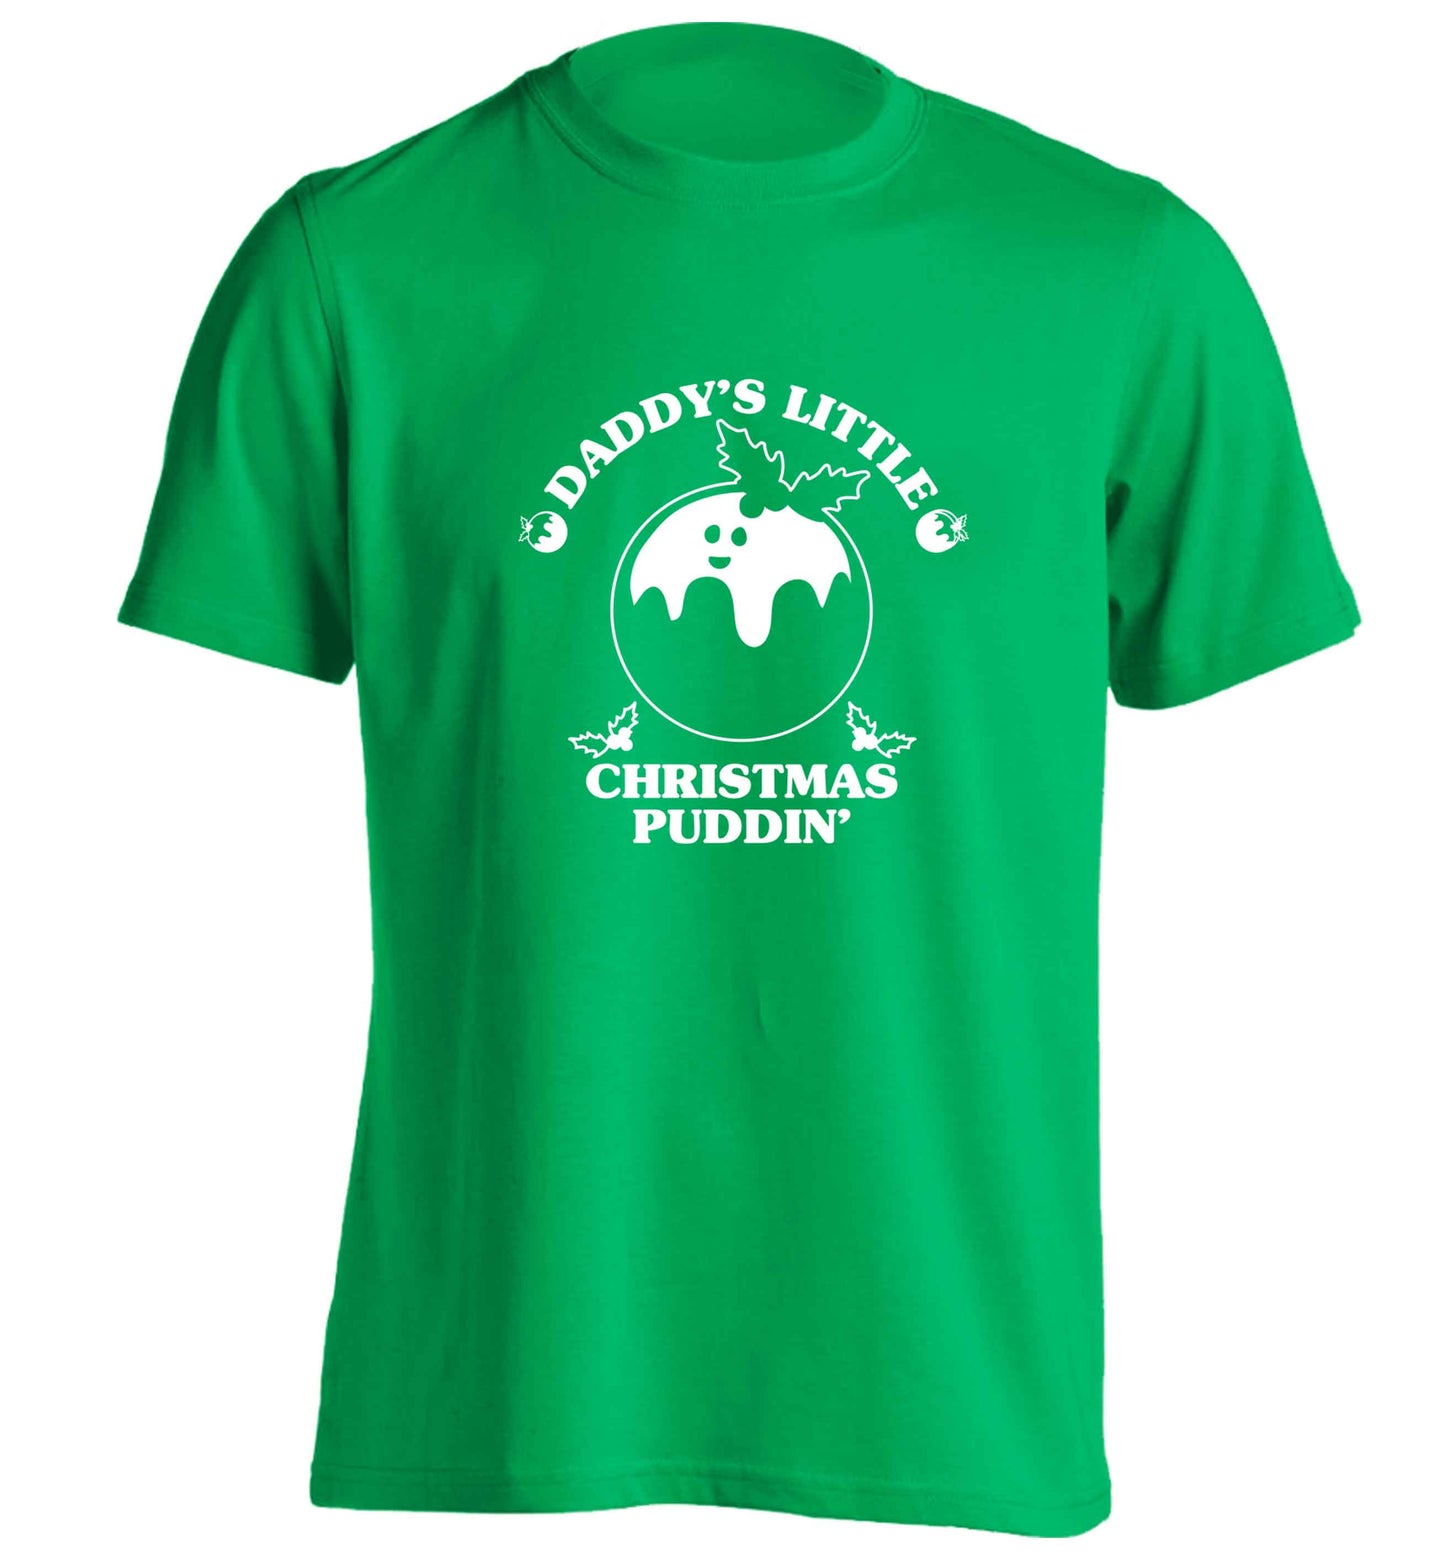 Daddy's little Christmas puddin' adults unisex green Tshirt 2XL